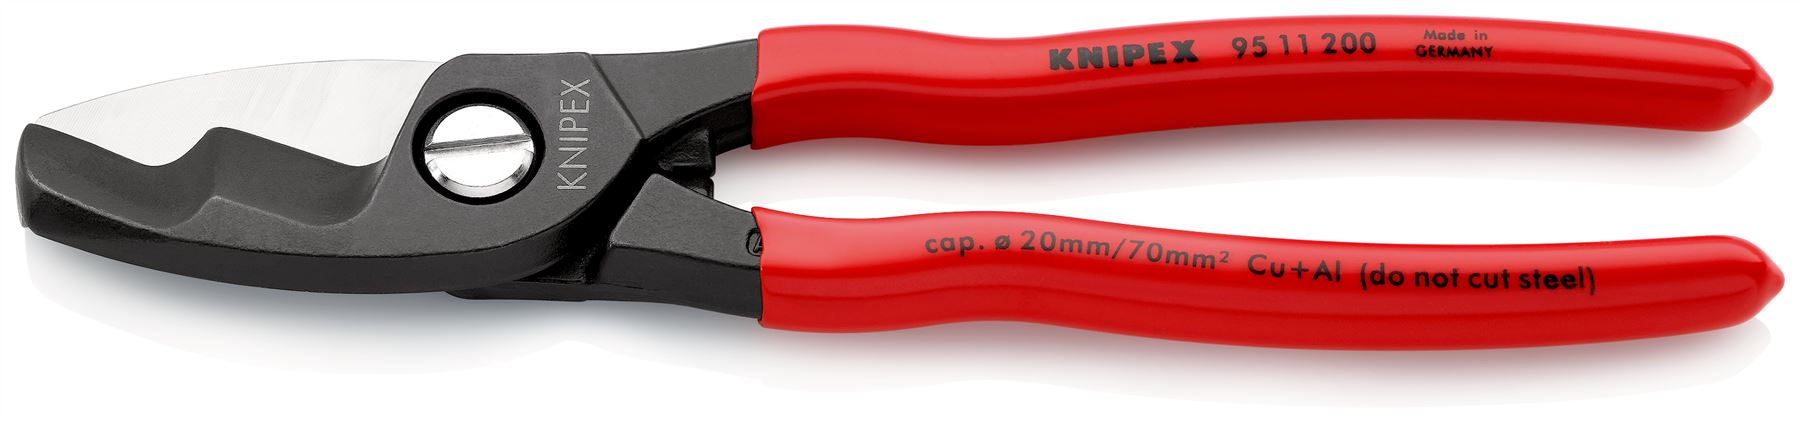 KNIPEX Cable Shears with Twin Cutting Edge 20mm Diameter Capacity 200mm Plastic Coated Handles 95 11 200 SB